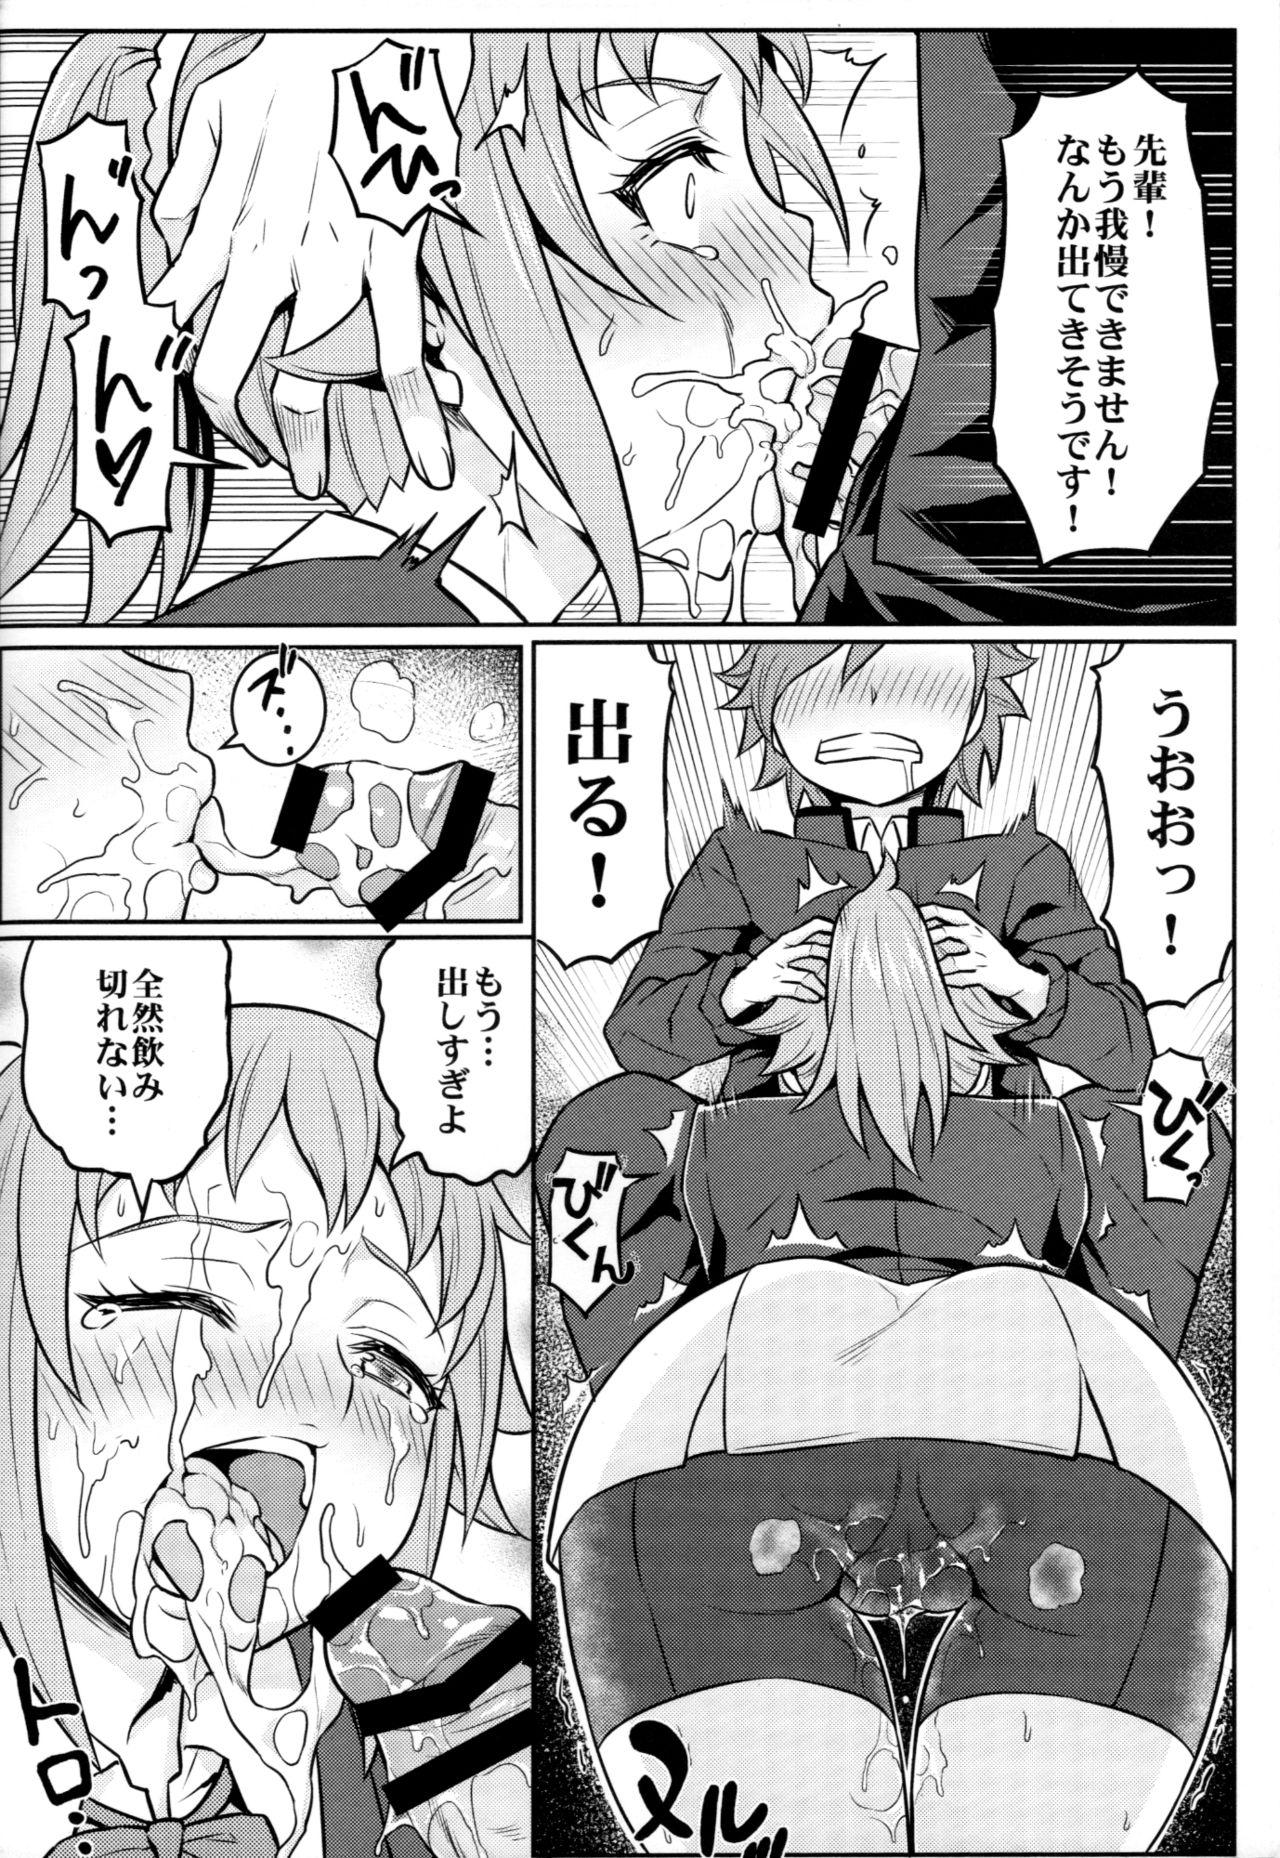 Ball Busting Nayamashii Fighters - Gundam build fighters try She - Page 9